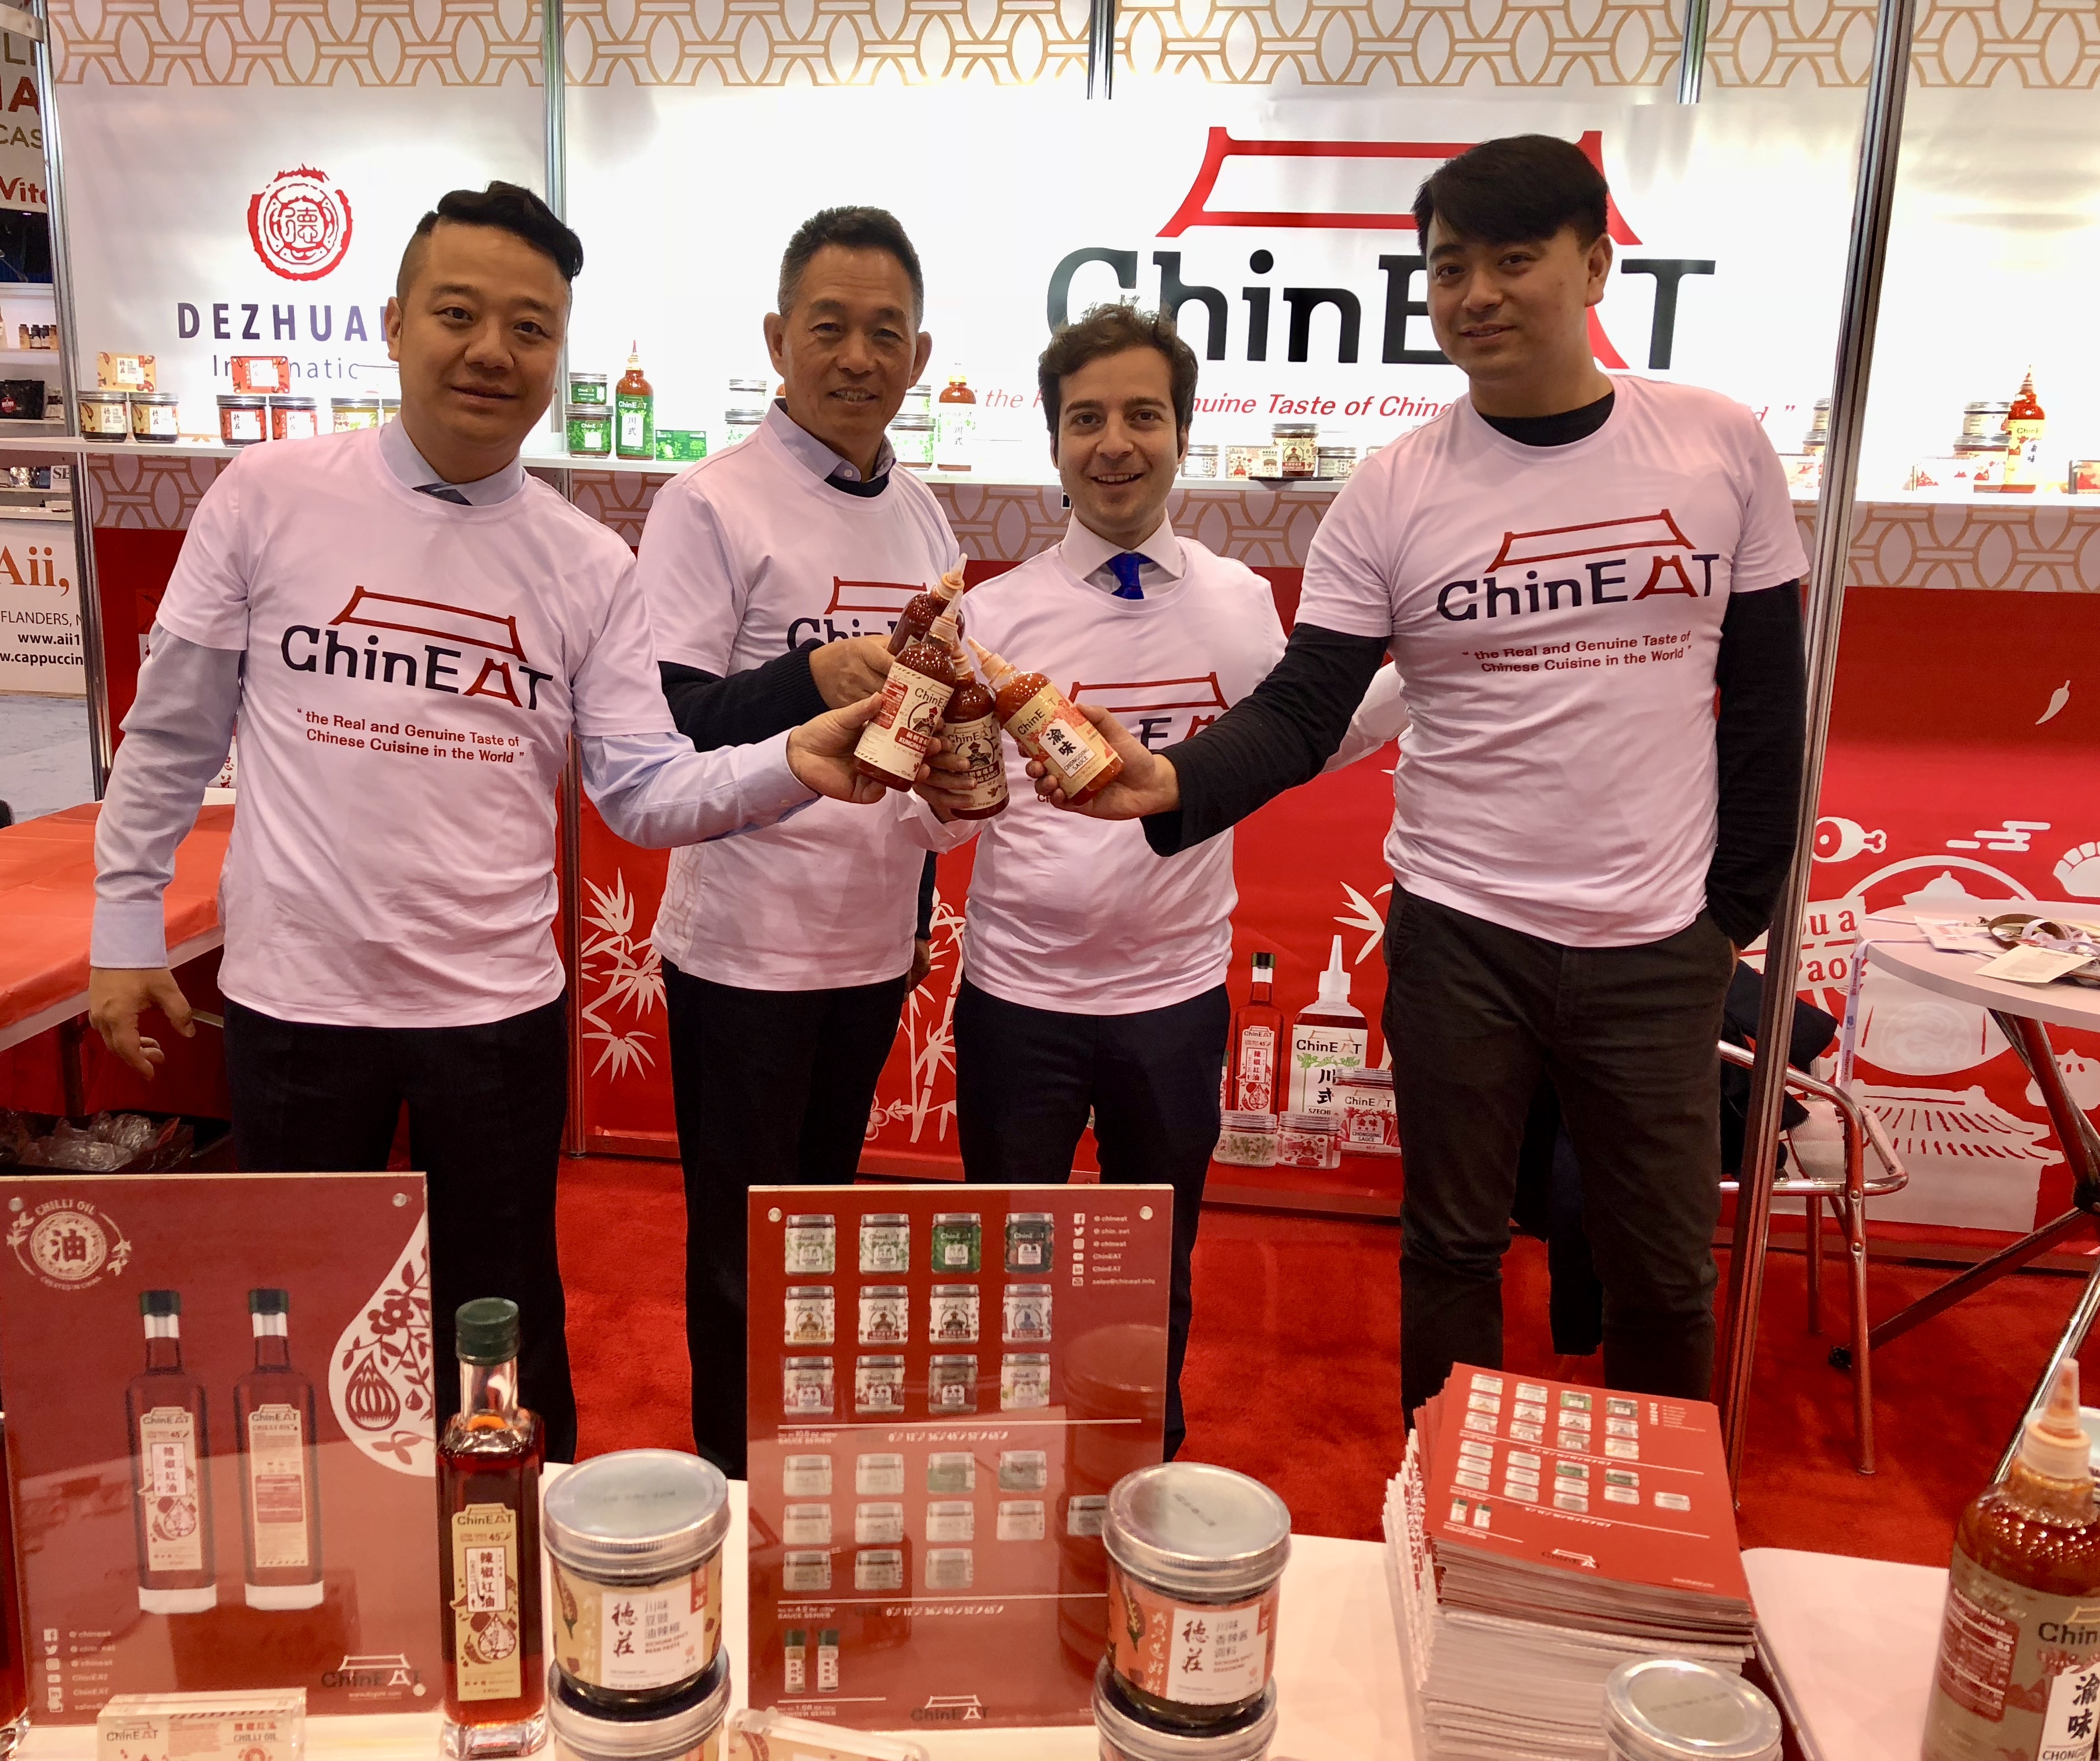 ChinEAT Team Showcase New Products at 99th National Restaurant Association Show